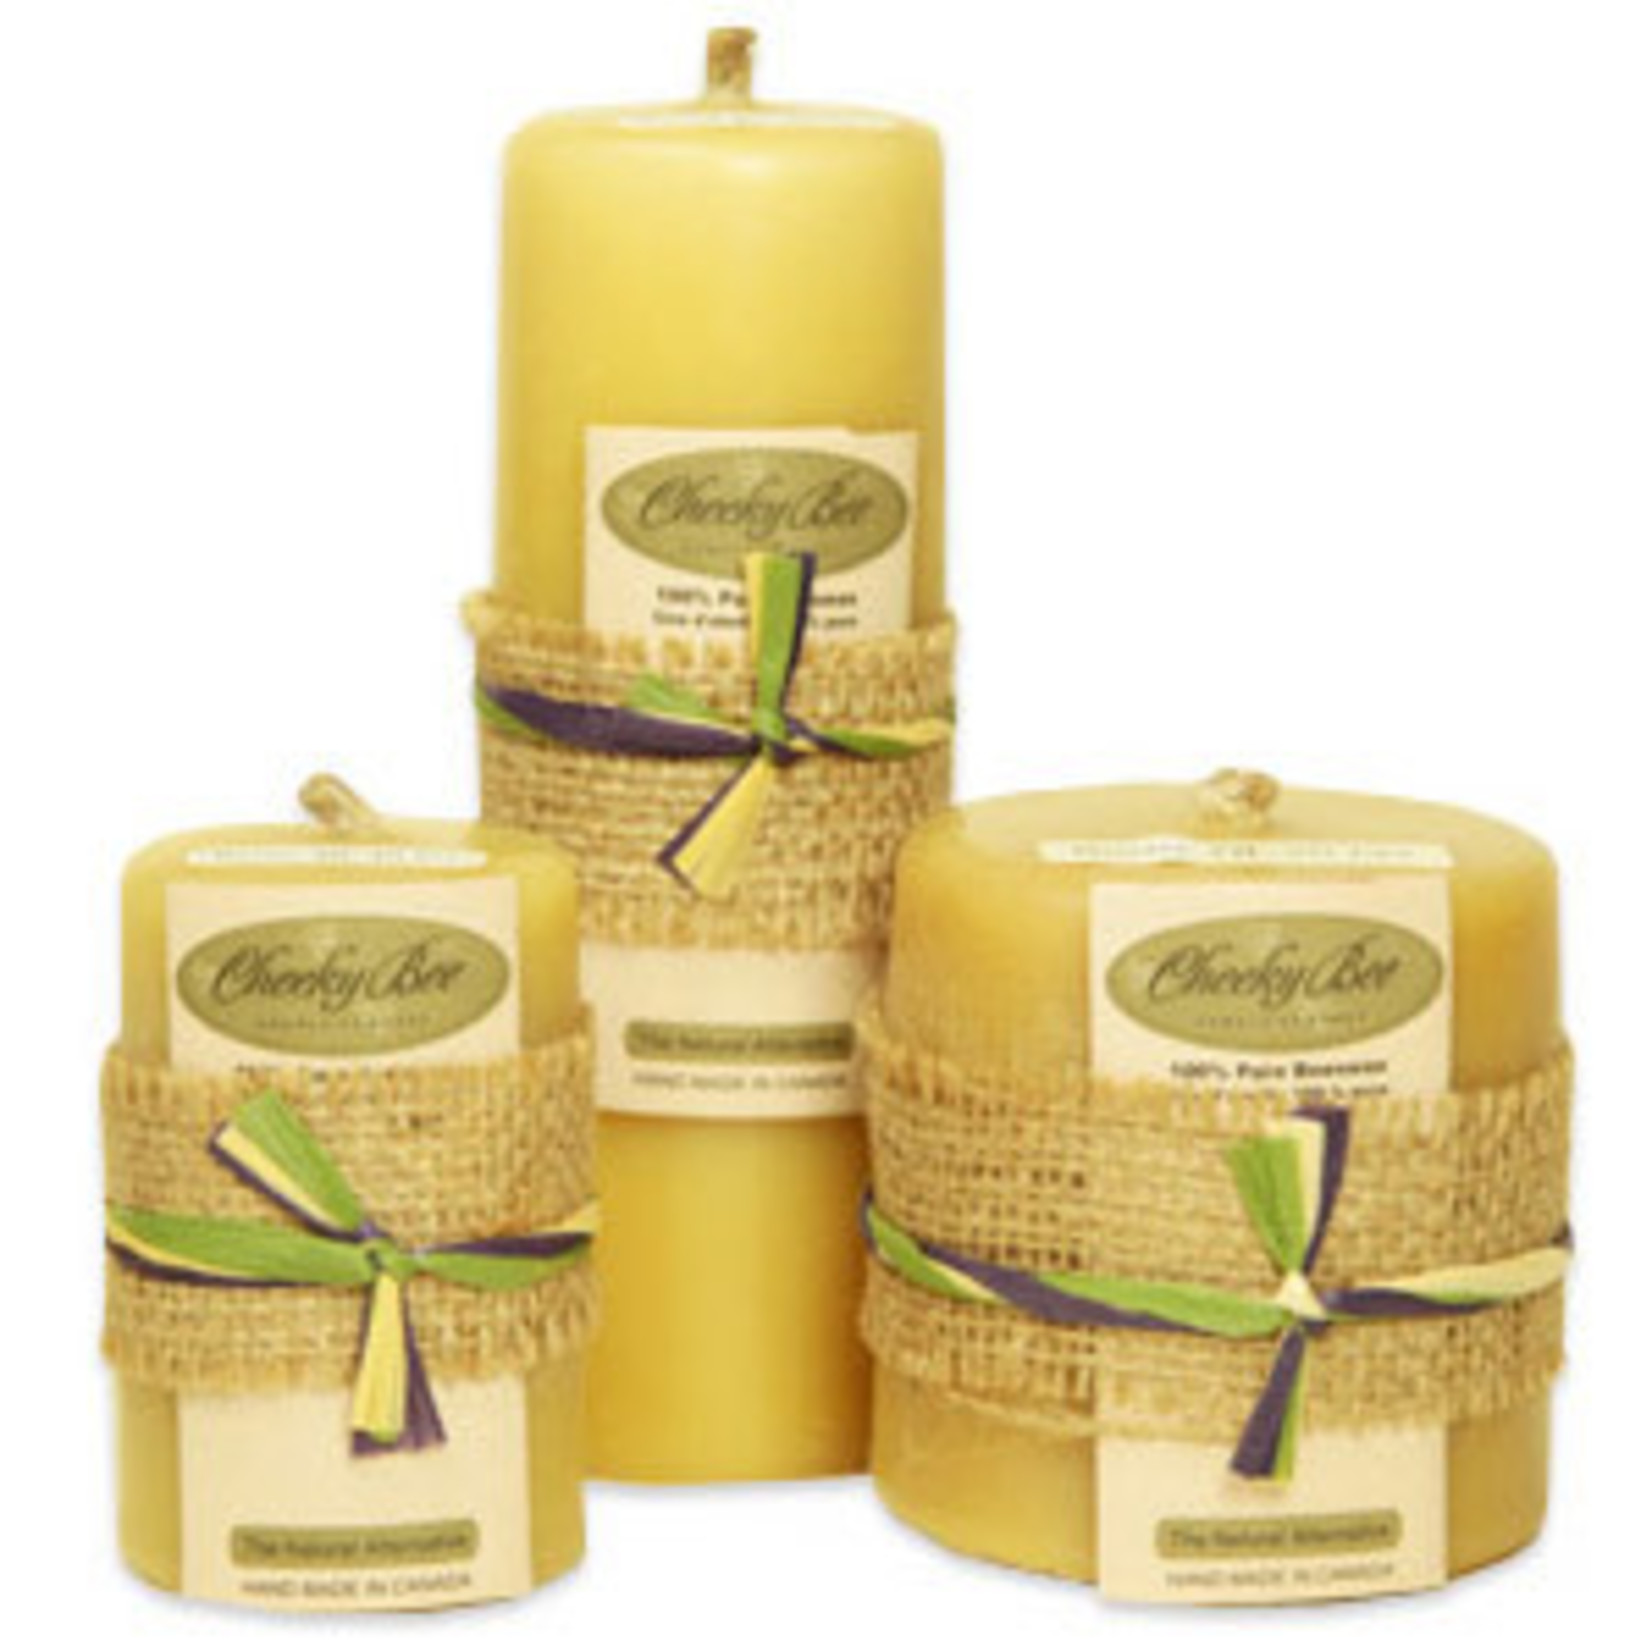 Cheeky Bee Candles Pillar Candle